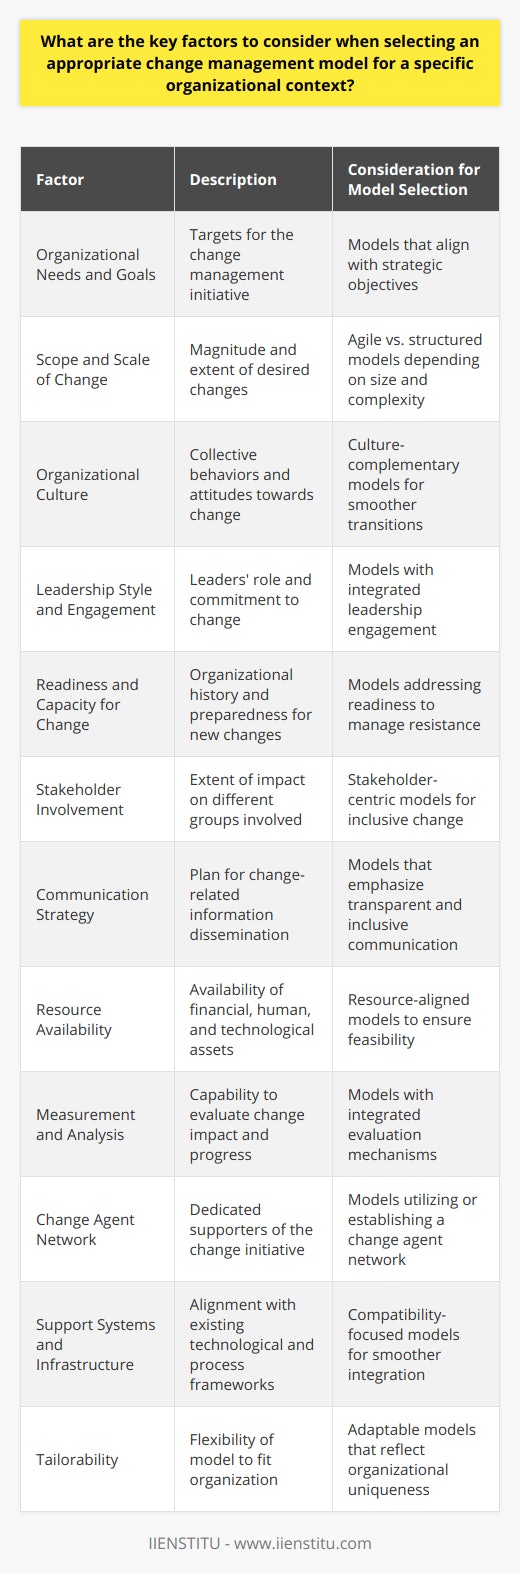 Selecting an appropriate change management model for your organization requires a nuanced approach, taking into account several key elements that can significantly influence the outcome of change initiatives. Understanding the specifics of your organizational context is essential in determining the most effective strategy. Here are critical factors to ponder:Organizational Needs and Goals:Begin with a clear comprehension of what your organization aims to achieve through change management. Identifying the strategic goals can help align the change management approach with long-term objectives.Scope and Scale of Change:Change varies in magnitude. Small, departmental adjustments might suit a more agile model, while company-wide transformation can benefit from structured, stage-gate frameworks. The size of your organization also influences the choice—larger organizations often require more robust change management structures.Organizational Culture:The prevailing attitudes and behaviors in your organization dictate how change is perceived and adopted. A model that complements the existing culture can facilitate smoother transitions. For organizations with a strong participative culture, models that involve collaborative approaches may have higher levels of acceptance.Leadership Style and Engagement:Leaders play a crucial role in change management. Models that integrate leadership engagement at multiple levels will likely thrive in environments where leaders are change champions. Additionally, leadership's commitment to change can positively impact the organization's ability to navigate transition phases.Readiness and Capacity for Change:Assess the organization's history with change and its current capacity to handle new adjustments. Models addressing change readiness can preemptively tackle resistance and foster a supportive environment for transition.Stakeholder Involvement:Different change management models emphasize varying degrees of stakeholder engagement. Identify internal and external stakeholders likely to be affected by the change and choose a model that ensures their concerns and recommendations are considered.Communication Strategy:Effective communication is at the heart of any successful change initiative. Select a change model that embodies a strong communication plan that's transparent, inclusive, and provides a feedback loop.Resource Availability:Consider the financial, human, and technological resources at your disposal. Some change management models are more resource-intensive. Aligning model complexity with resource availability enhances deliverability.Measurement and Analysis:A model that incorporates evaluation mechanisms allows for tracking progress and impact. Adaptive models that enable feedback analysis and adjustments as the change is rolled out can lead to more sustainable outcomes.Change Agent Network:The presence of a dedicated group of individuals who drive and support the change process can be instrumental. Choose a model that either relies on or builds a network of change agents within the organization.Support Systems and Infrastructure:The existing infrastructure, including technology and processes, should support the change management model. Compatibility reduces friction and streamlines transition.Tailorability:Being able to adapt the model to suit specific organizational intricacies ensures that it reflects the unique challenges and opportunities your organization faces.By thoroughly examining these factors and aligning them with a change management model that resonates with your organizational framework, you create a foundation for change that's robust, adaptive, and poised for success. Such strategic alignment can be further developed with the guidance and expertise of institutions like IIENSTITU, known for providing comprehensive resources and training for change management and organizational development.